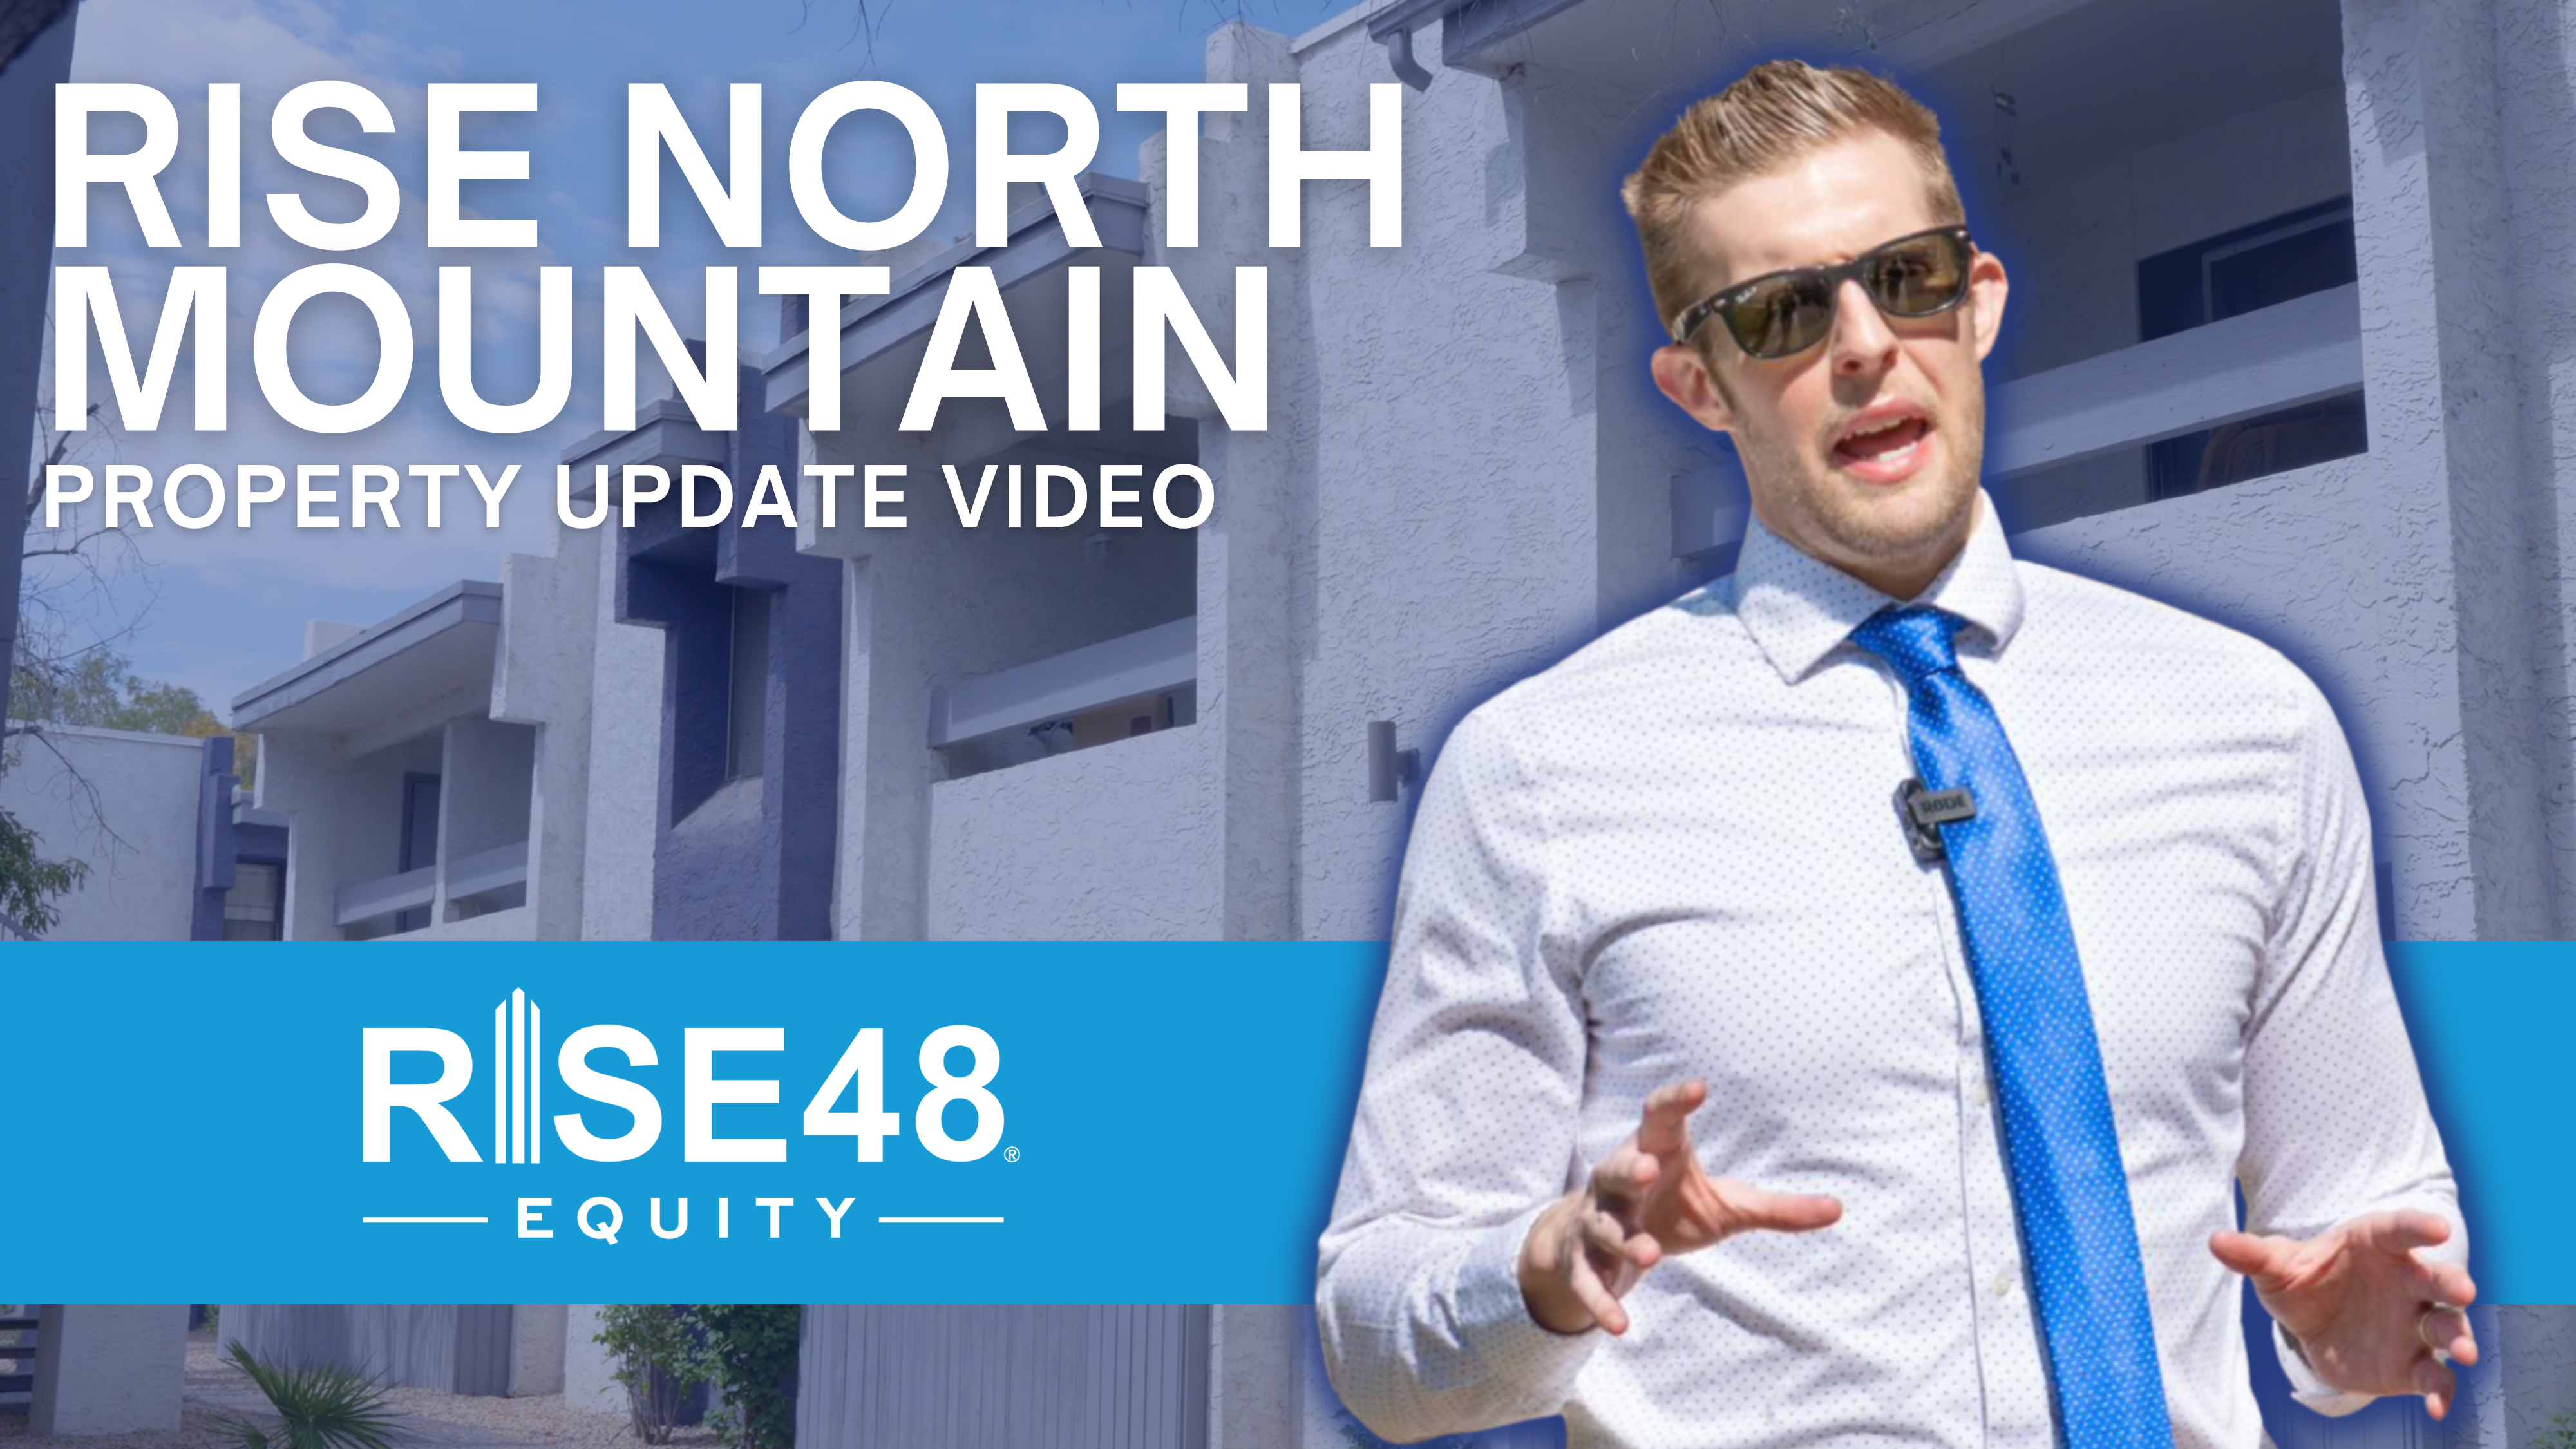 Rise North Mountain Property Update